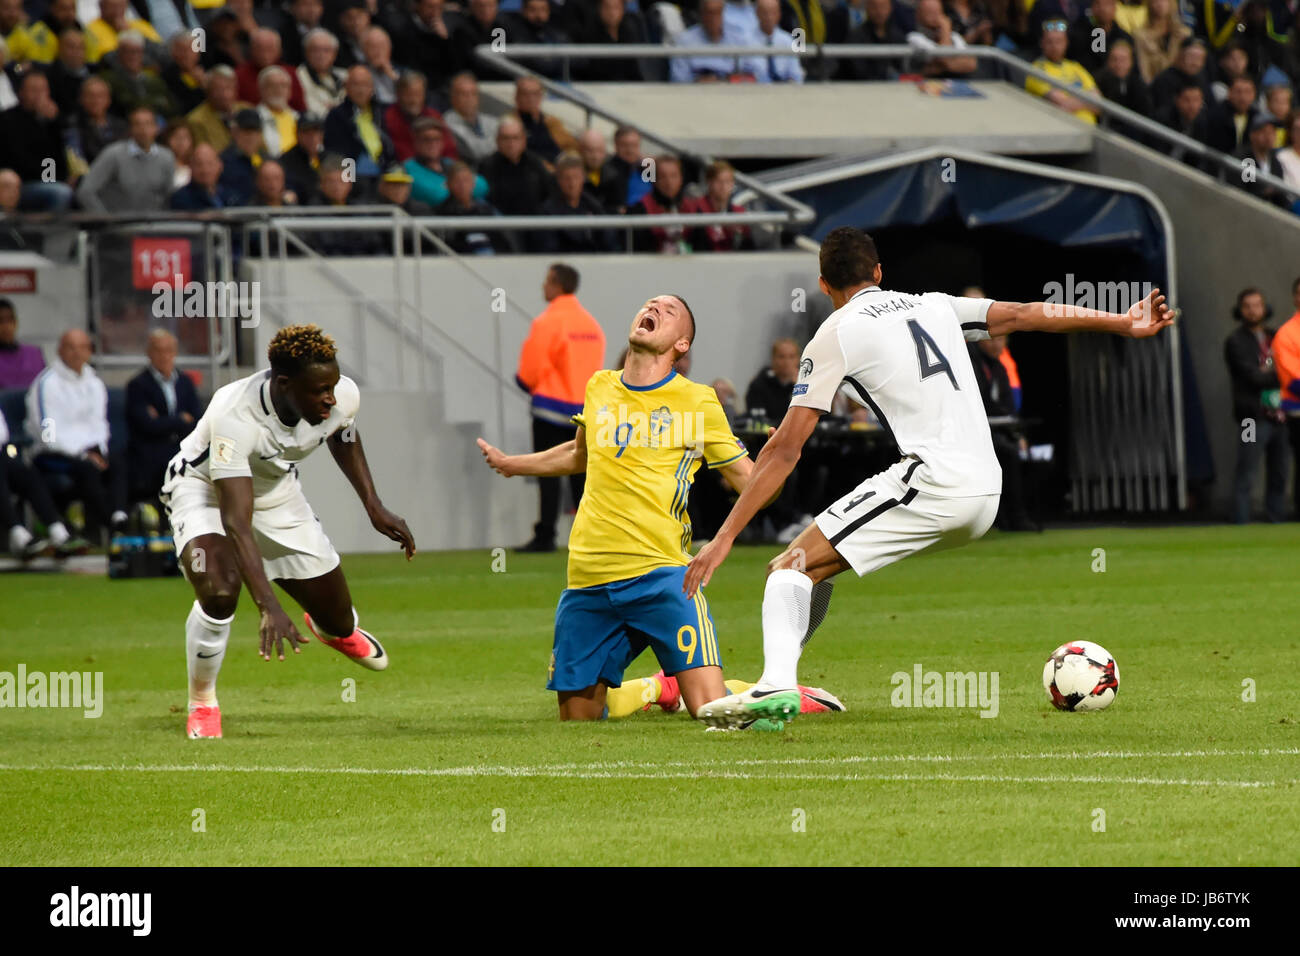 Stockholm, Sweden. 9th june, 2017. Sweden 9 Marcus Berg screaming out loud in the FIFA World Cup™ Qualifiers game between Sweden and France. Credit: Bror Persson/Frilansfotograferna/Alamy Live News Stock Photo